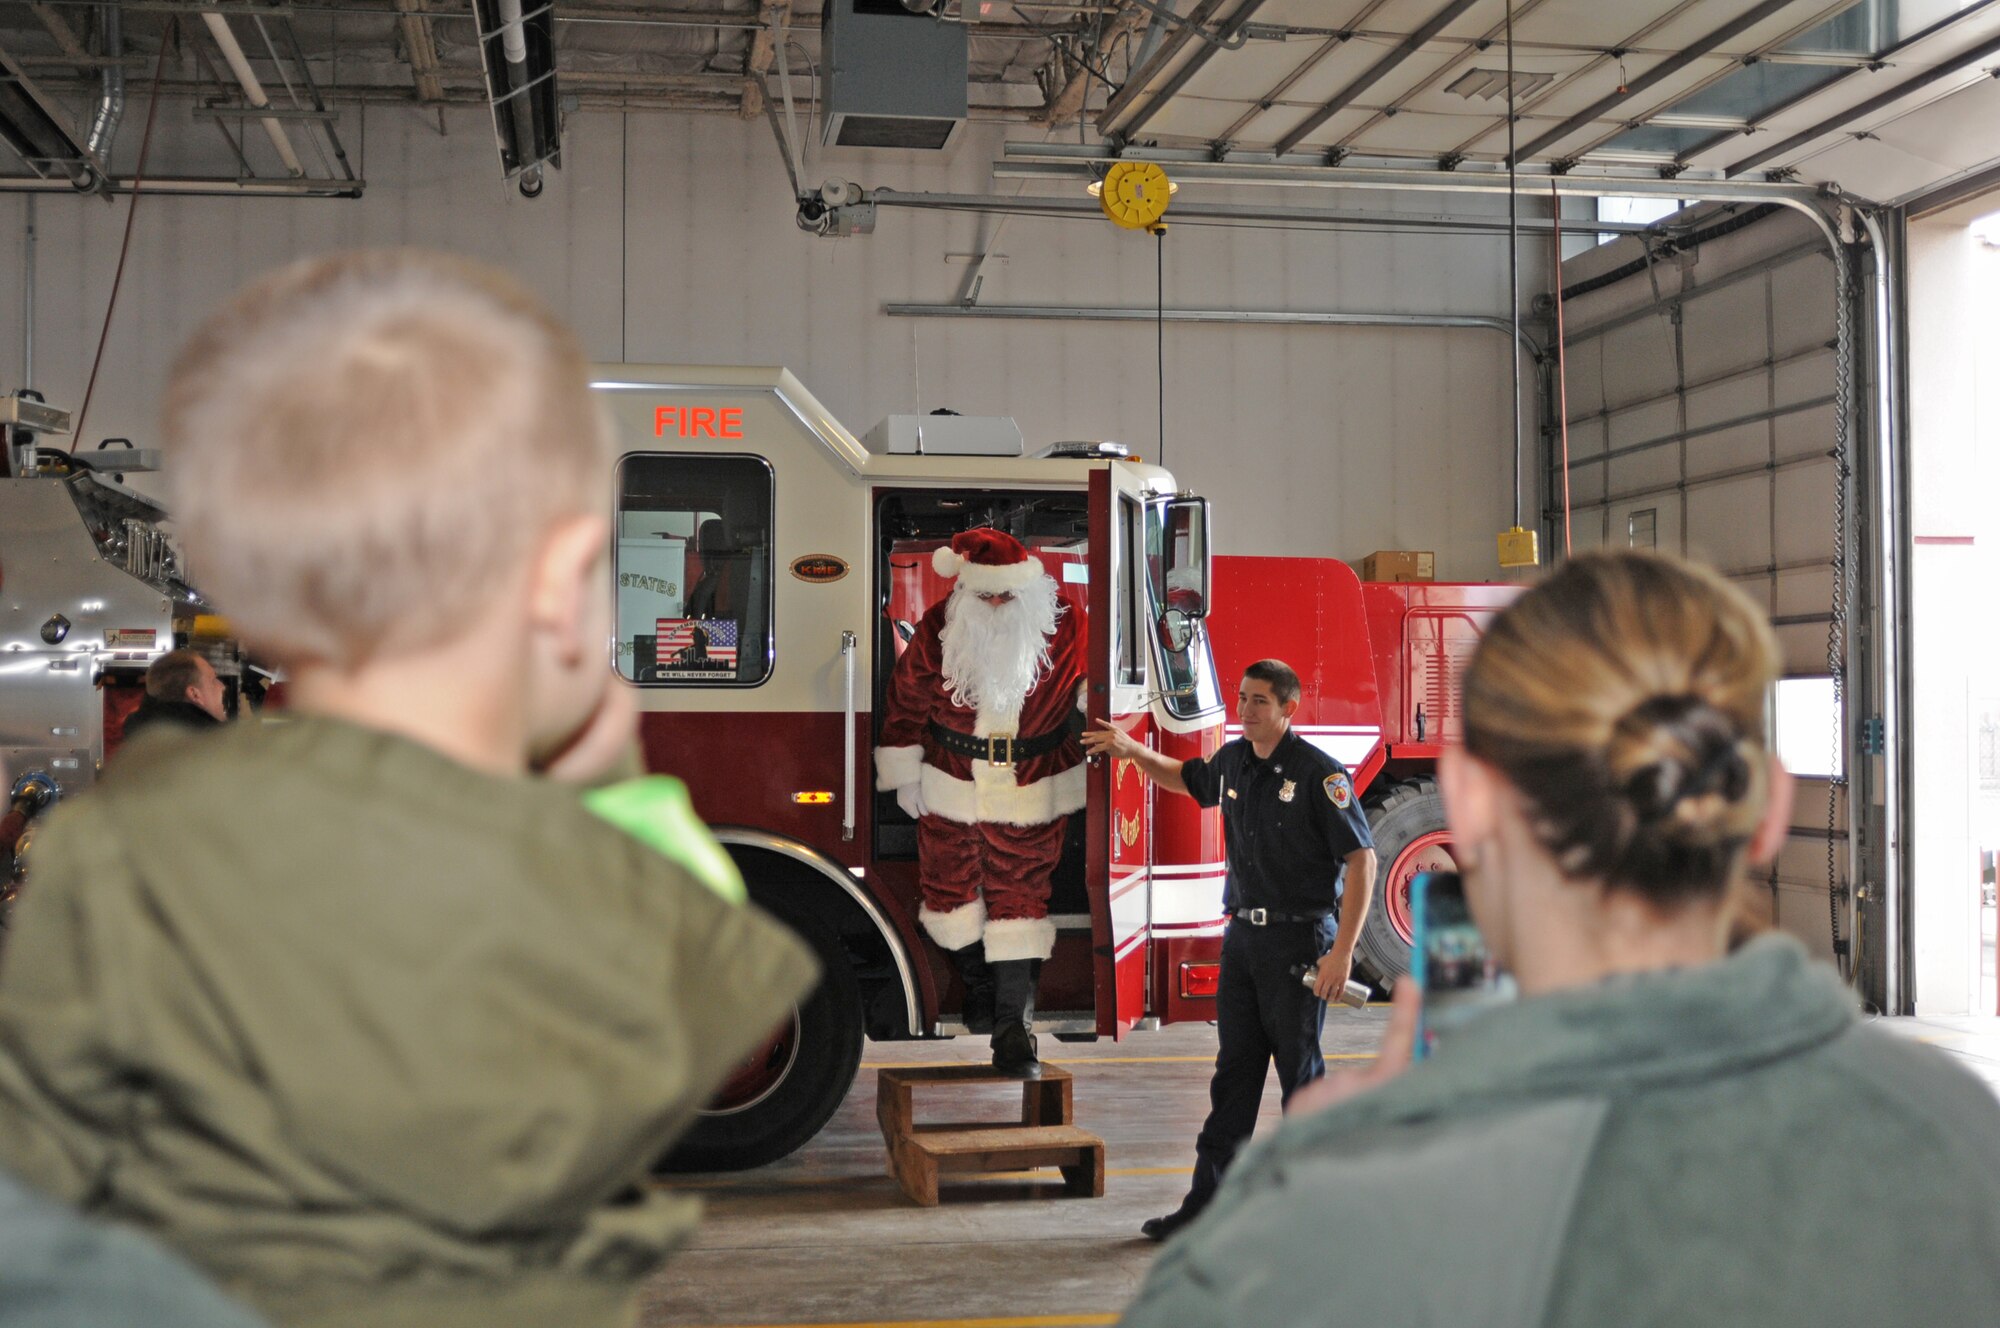 Excited children and their parents watch as Santa Clause arrives at the Kingsley Field fire station in fire truck Dec. 7, 2014.  Because of construction on the main hangar, the annual children's Christmas carnival had been cancelled, but thanks to a few Kingsley members they were able to organize a smaller gathering for the young children at the fire house.  (U.S. Air National Guard photo by Tech. Sgt. Daniel Condit / Released)